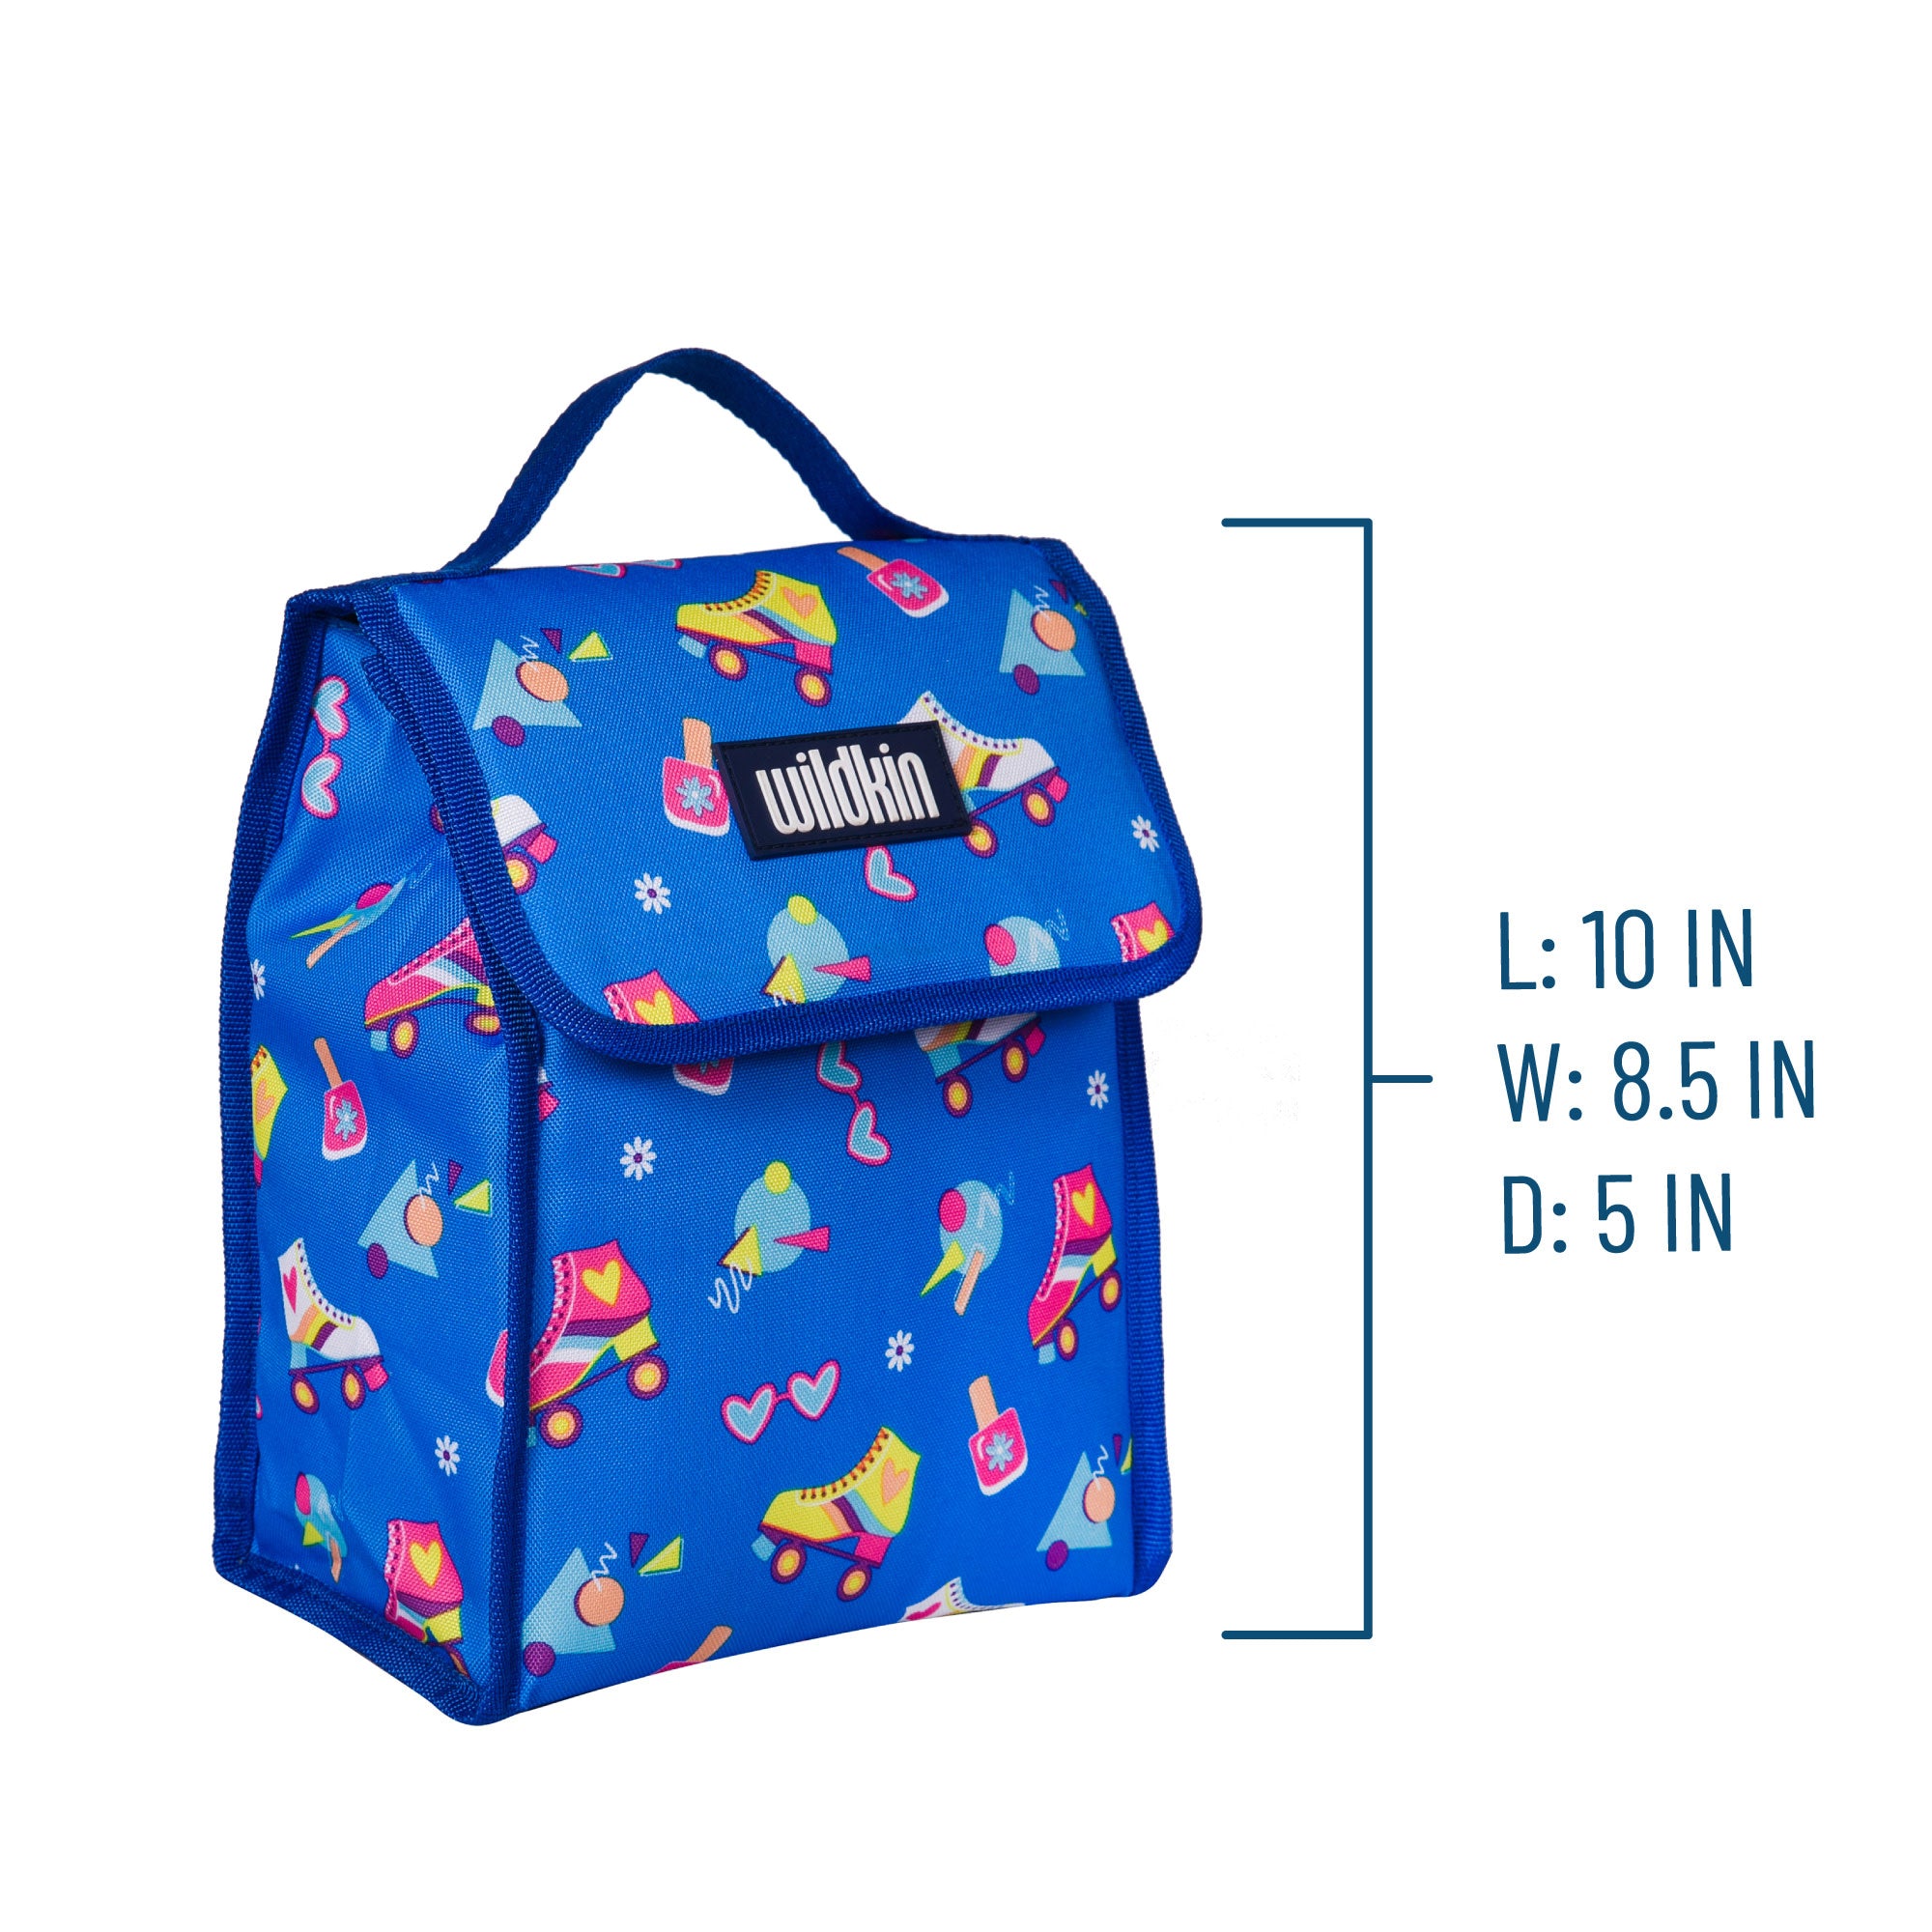 Wildkin Kids Insulated Lunch Box for Boy and Girls, BPA Free (Rad Roller  Skates)